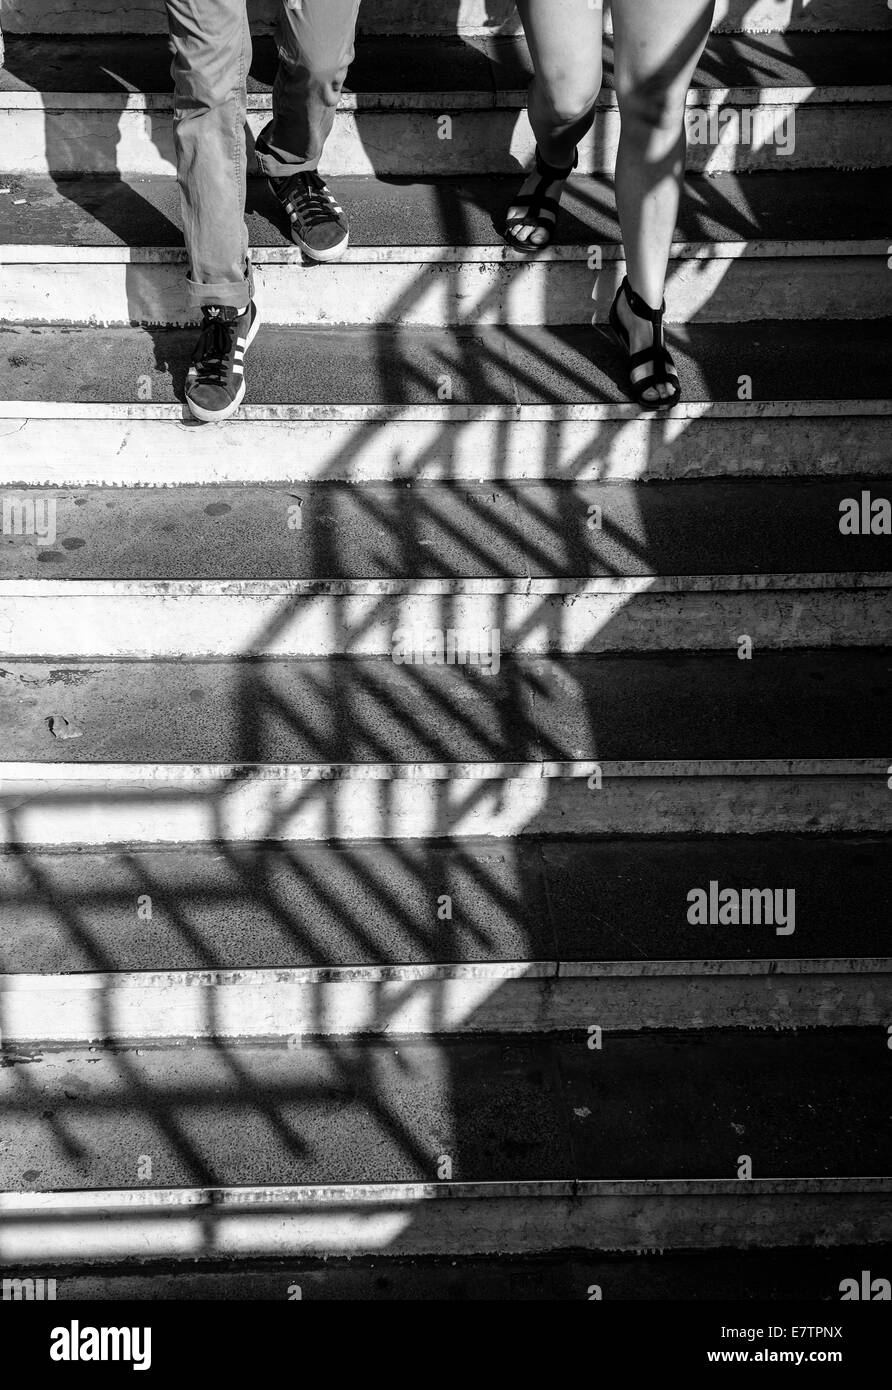 Shadows play as a couple descends a stairway Stock Photo